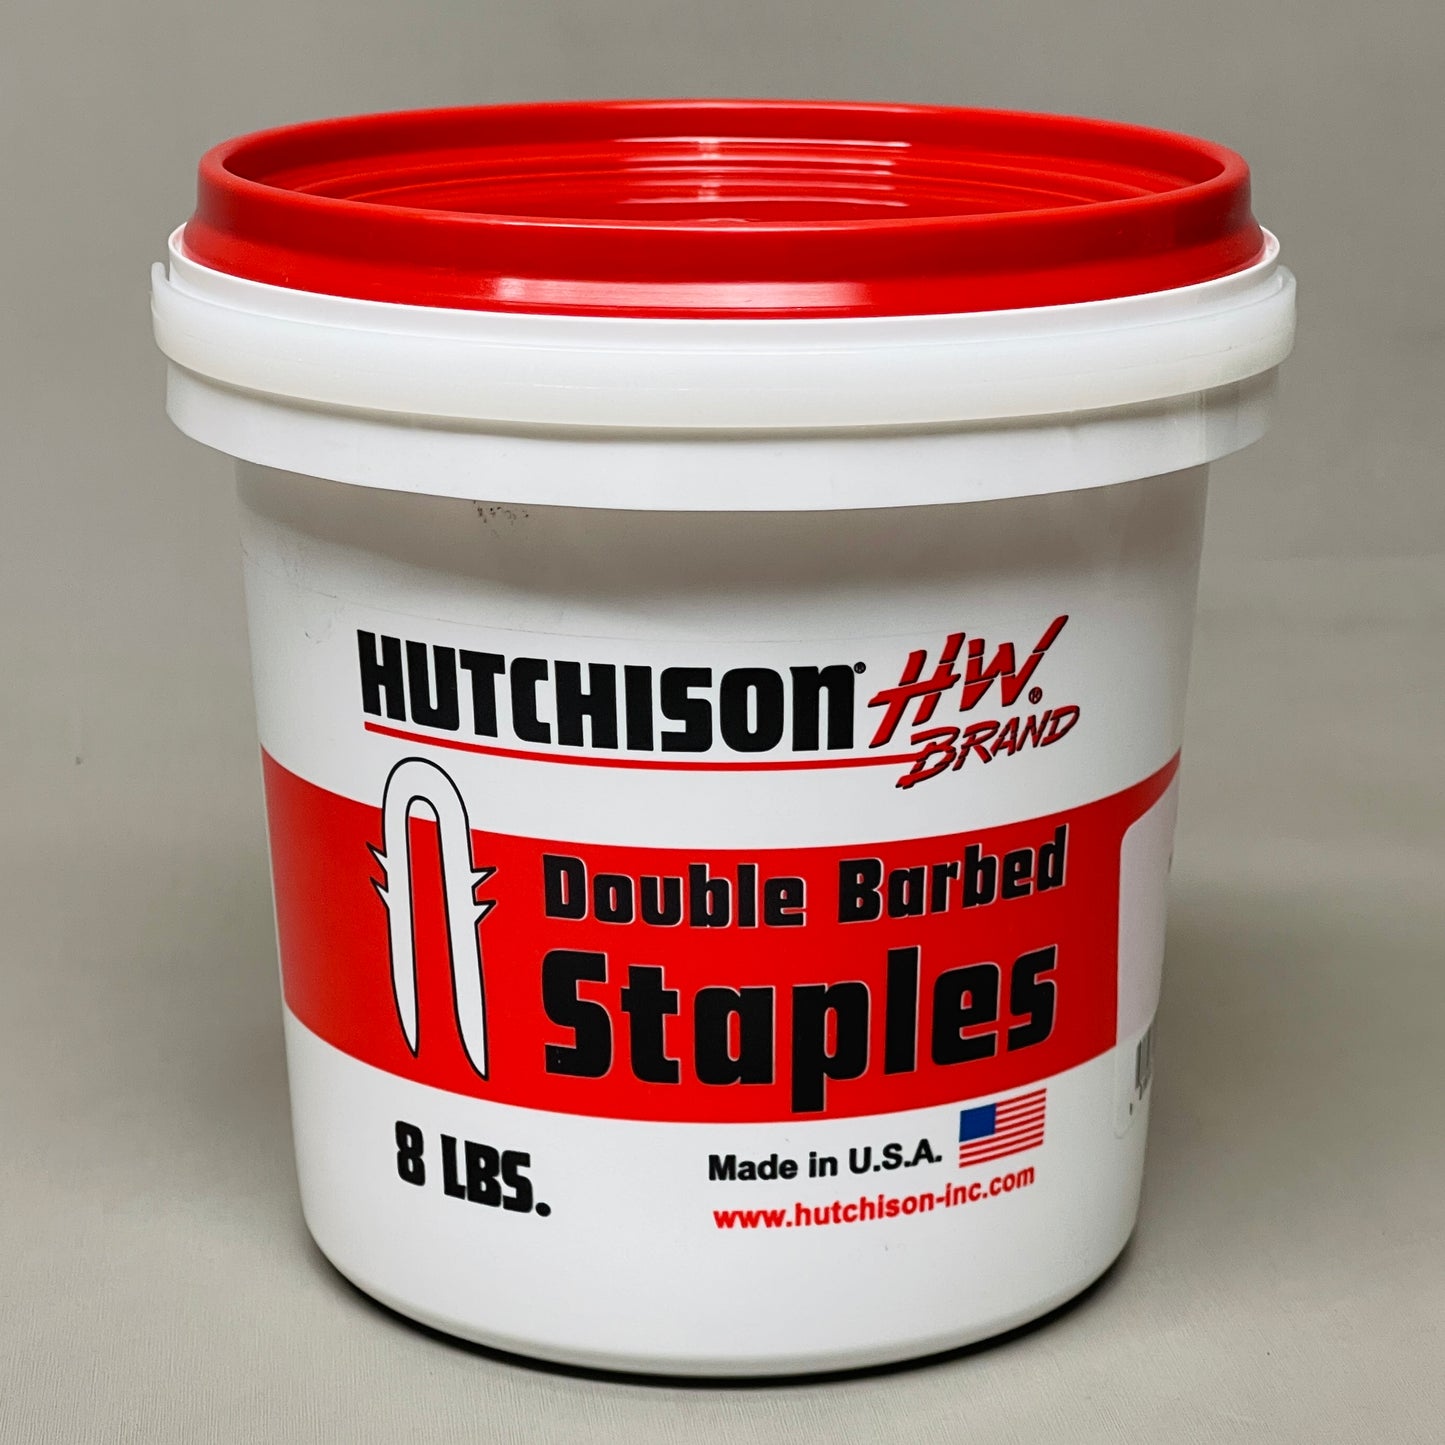 HW BRAND (Hutchinson Inc) Double Barbed Galvanized Fence Staples 1-1/2" 8 lb (New)